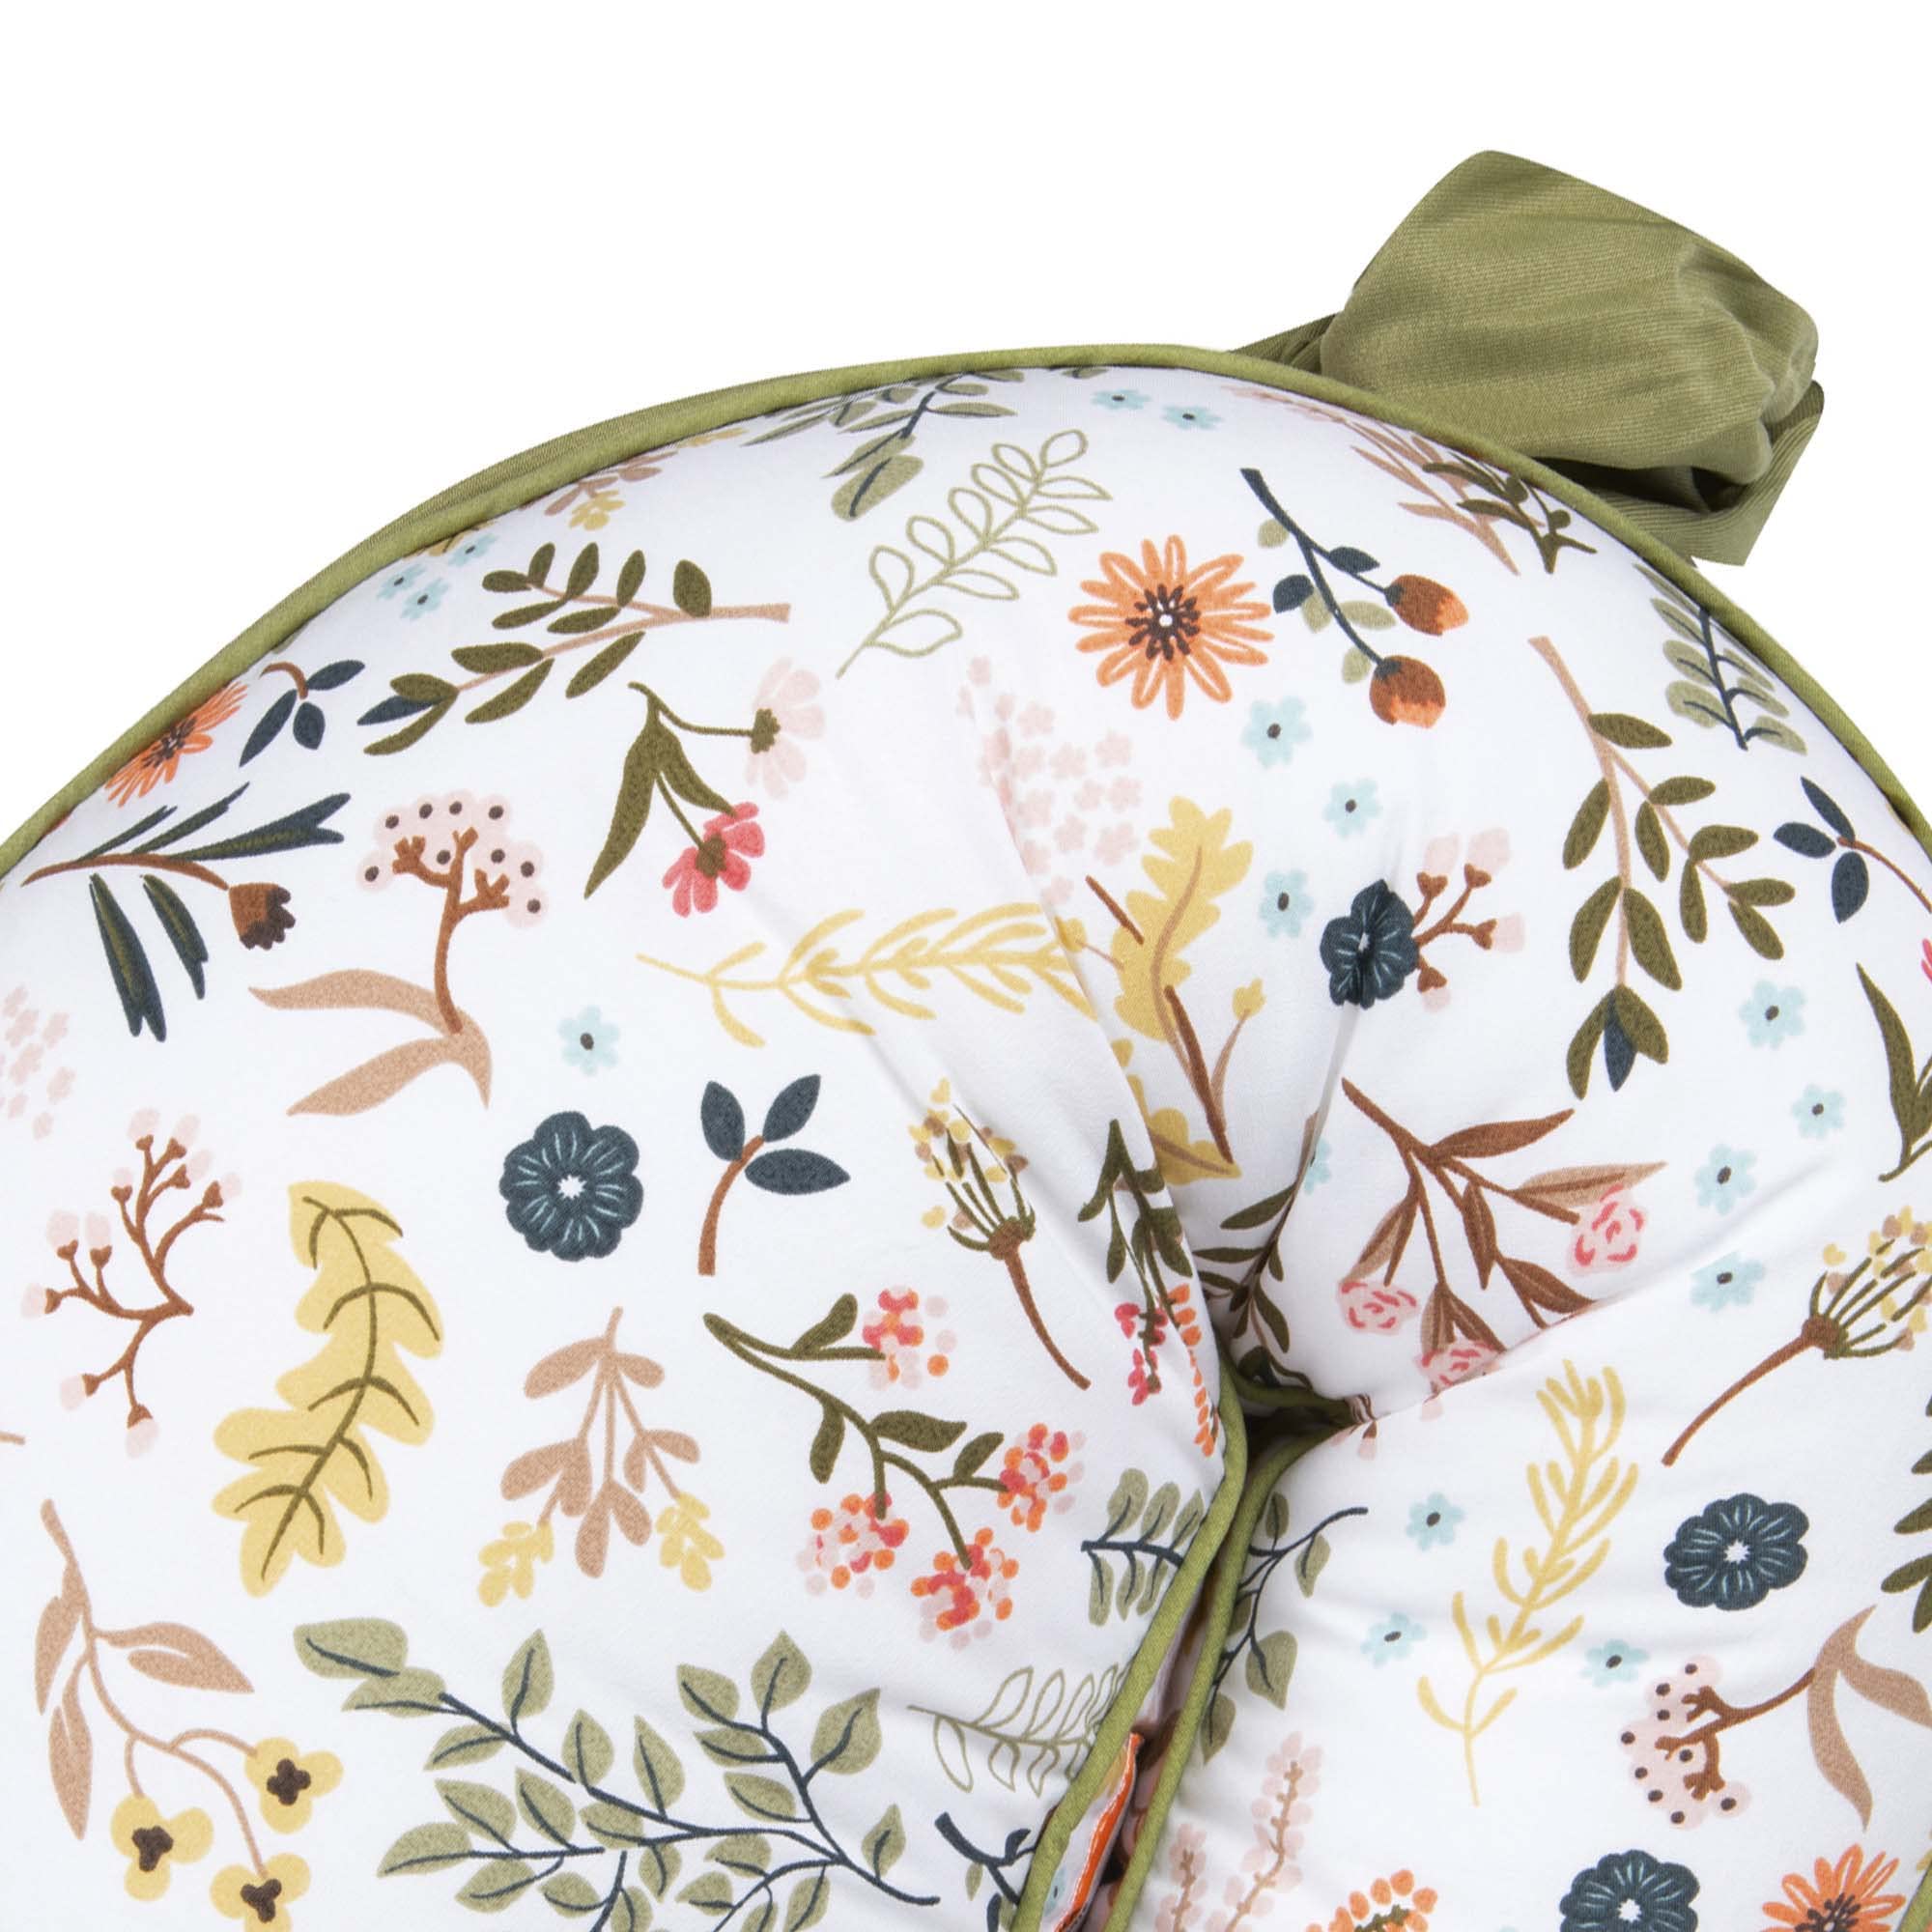 Boppy Anywhere Nursing Support, Sage and Spice Floral with Stretch Belt That Stores Small, Breastfeeding and Bottle-Feeding Support at Home and for Travel, Plus Sized to Petite, Machine Washable